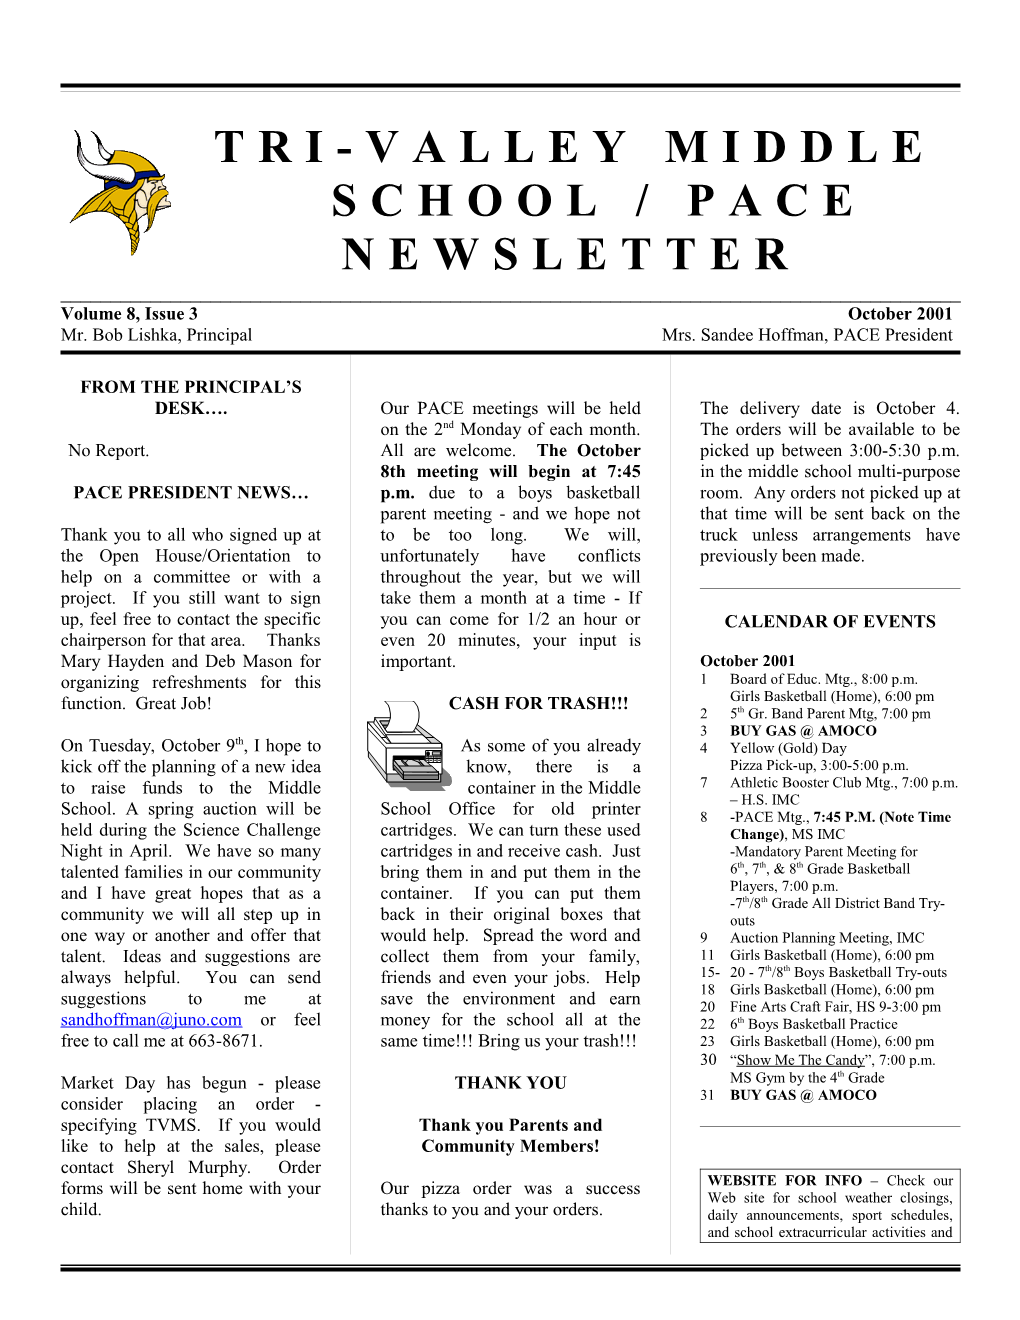 Tri-Valley Middle School / Pace Newsletter